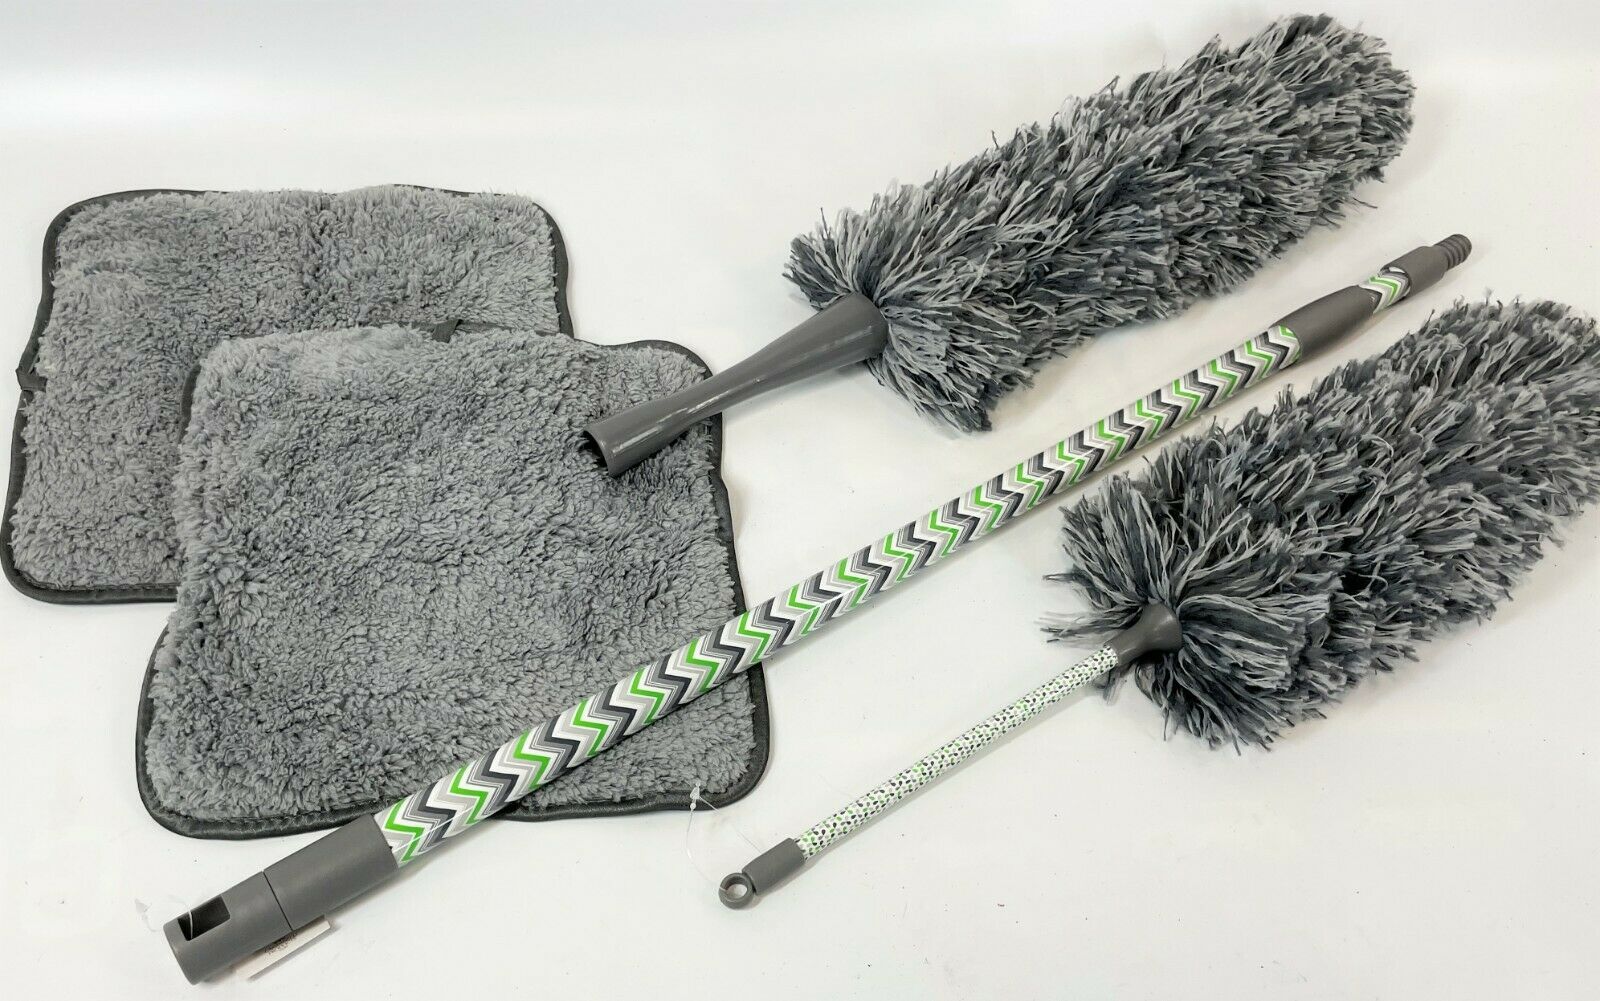 New 5 Piece Campanelli Qvc Green Gray Telescopic Pole Duster Dust Cleaning Kit